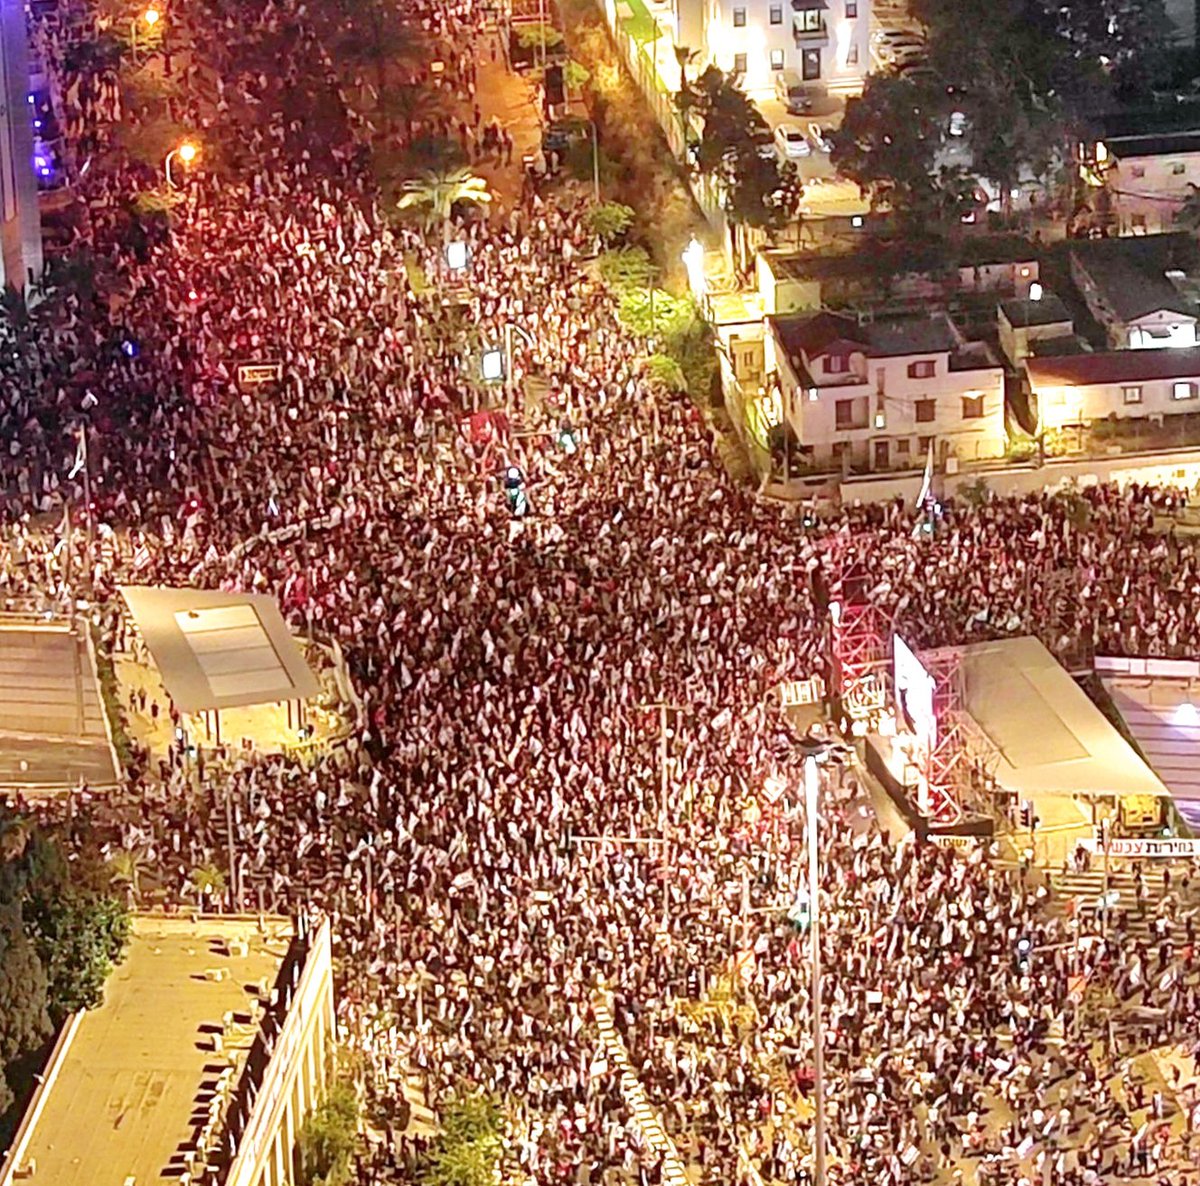 #TelAviv right now: Thousands of anti-govt protesters are once again on the streets calling for the immediate ousting of @Netanyahu and his inept, corrupt, and messianic clan. #GazaWar